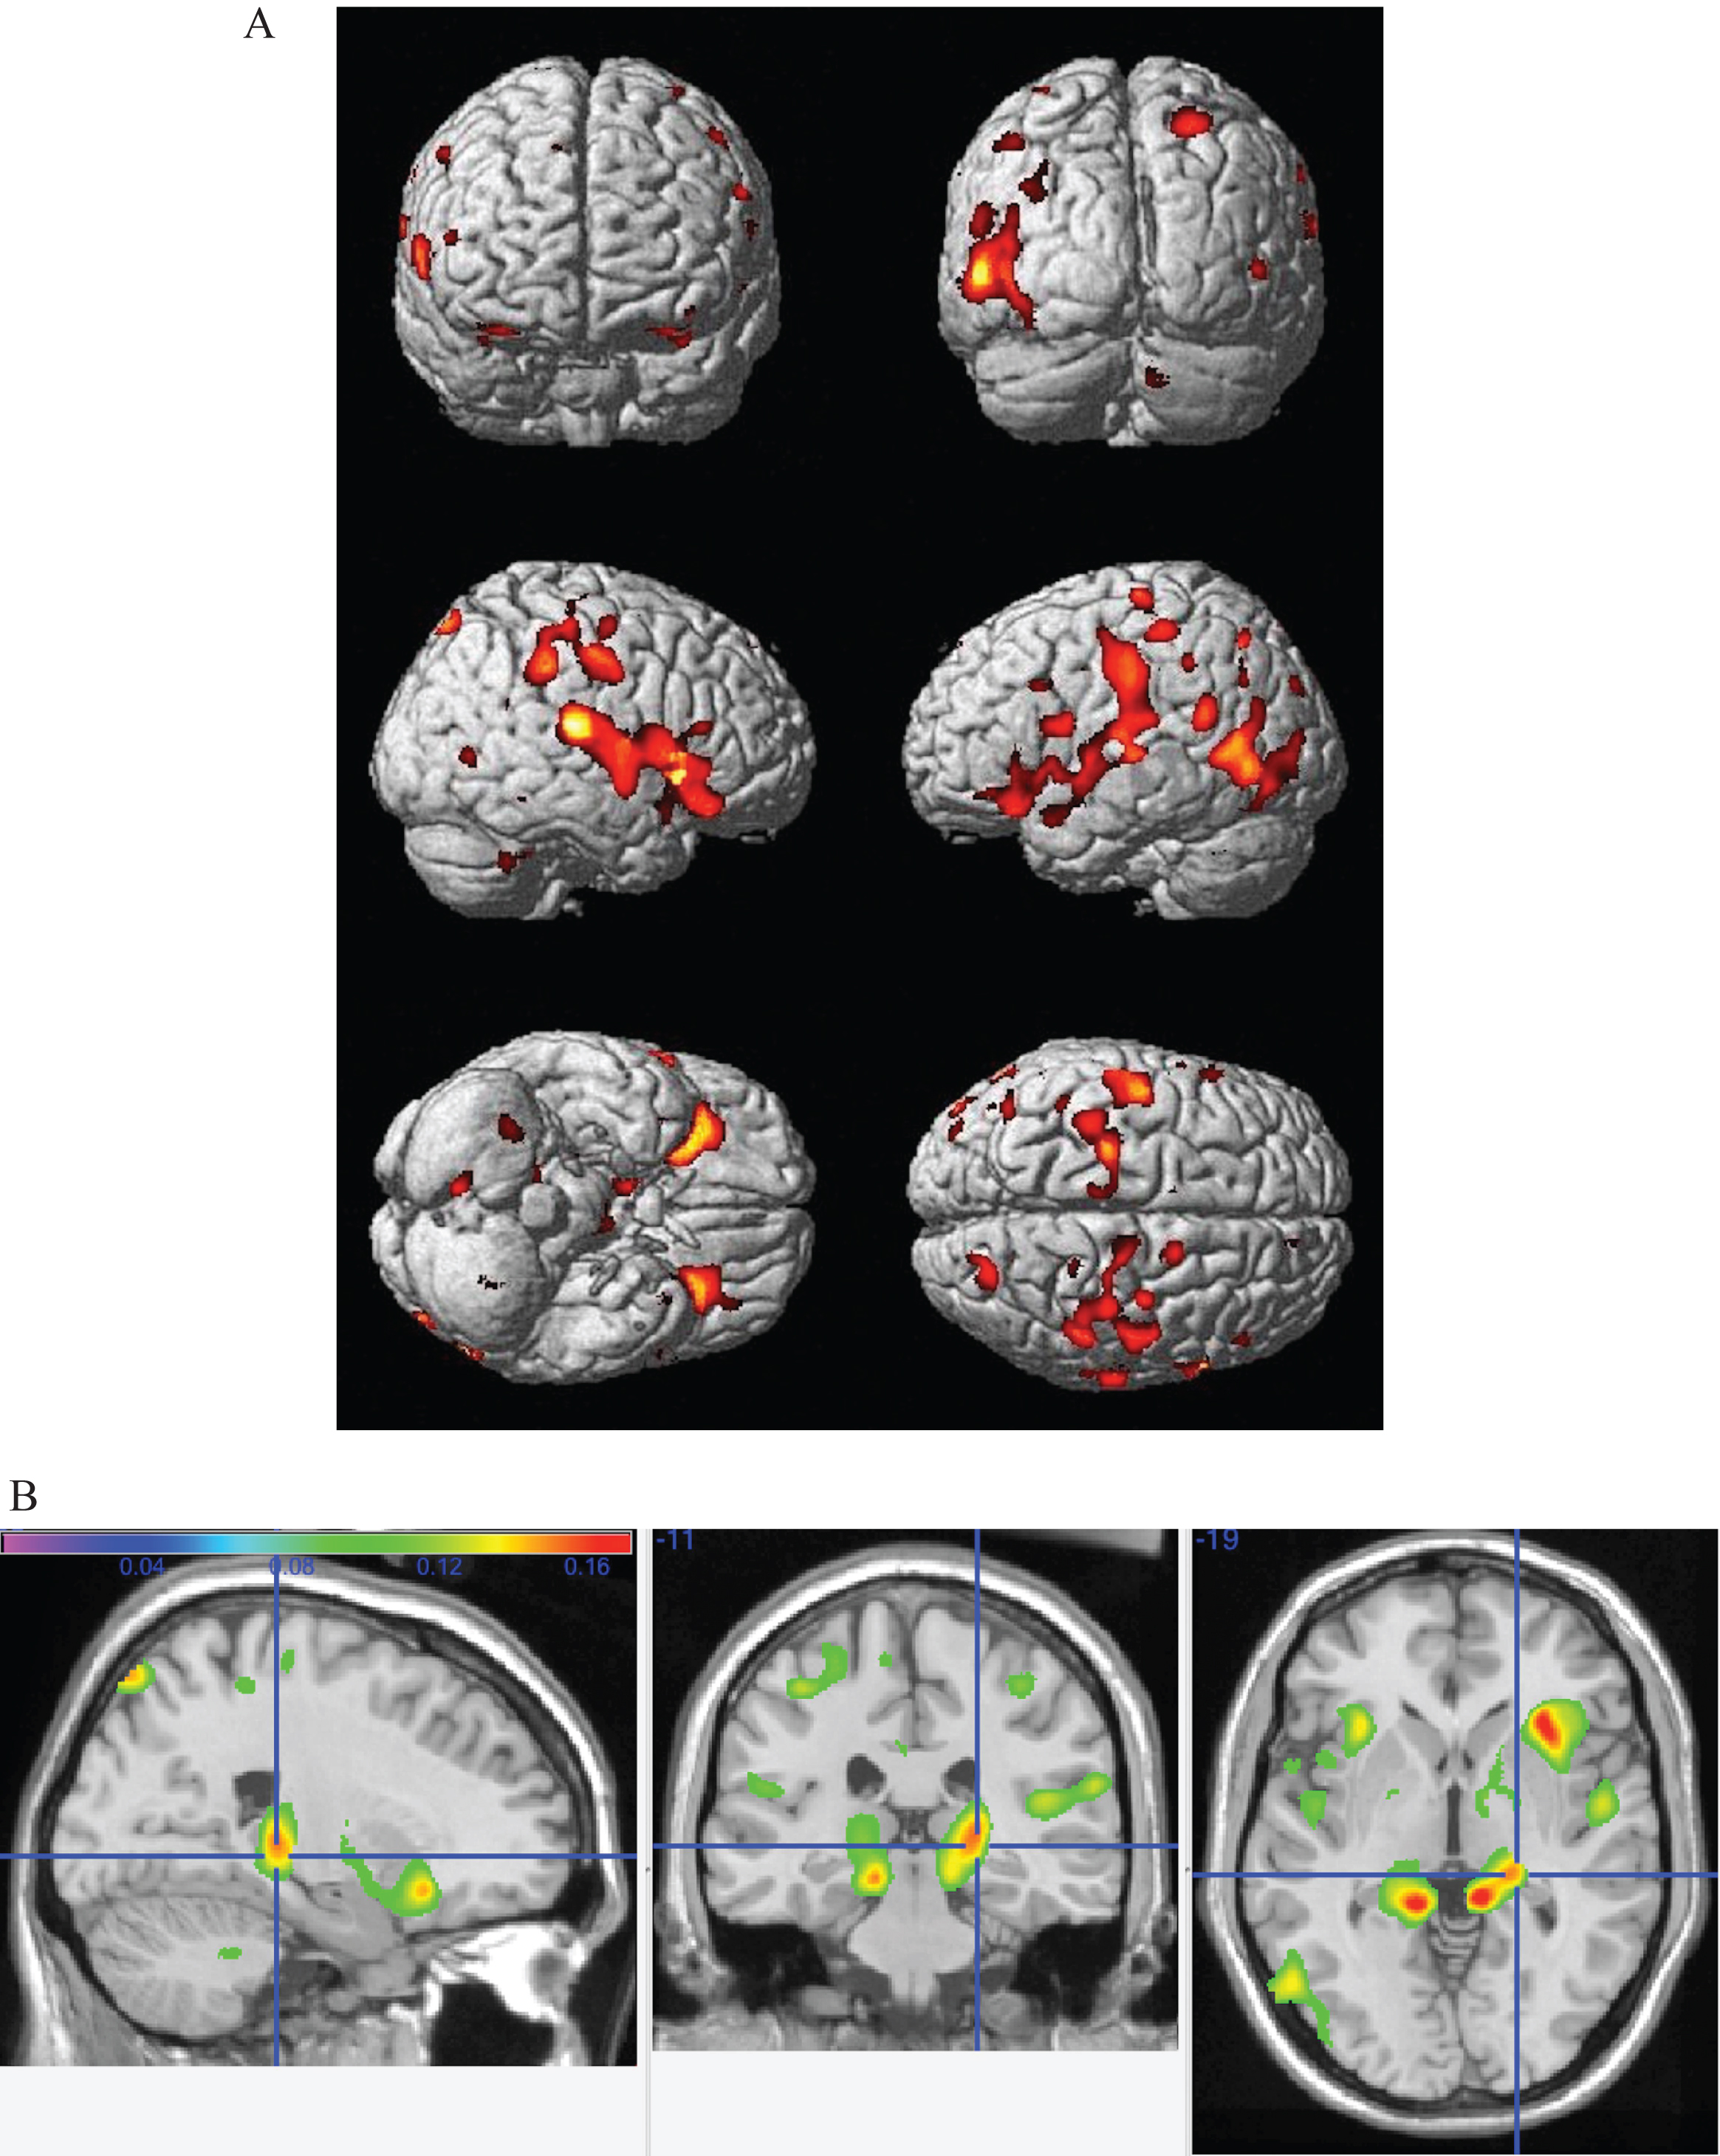 A) Main effect of increasing caloric expenditure on gray matter structure in the CHS. Red and yellow colors reflect larger gray matter volumes in the frontal, temporal, and parietal lobes with FDR <0.05. B) The main effects from panel A overlayed onto orhtogonal slices. Hotter colors denote a stronger effect and the cross hairs highlight the main effect of physical activity in the right hippocampus.